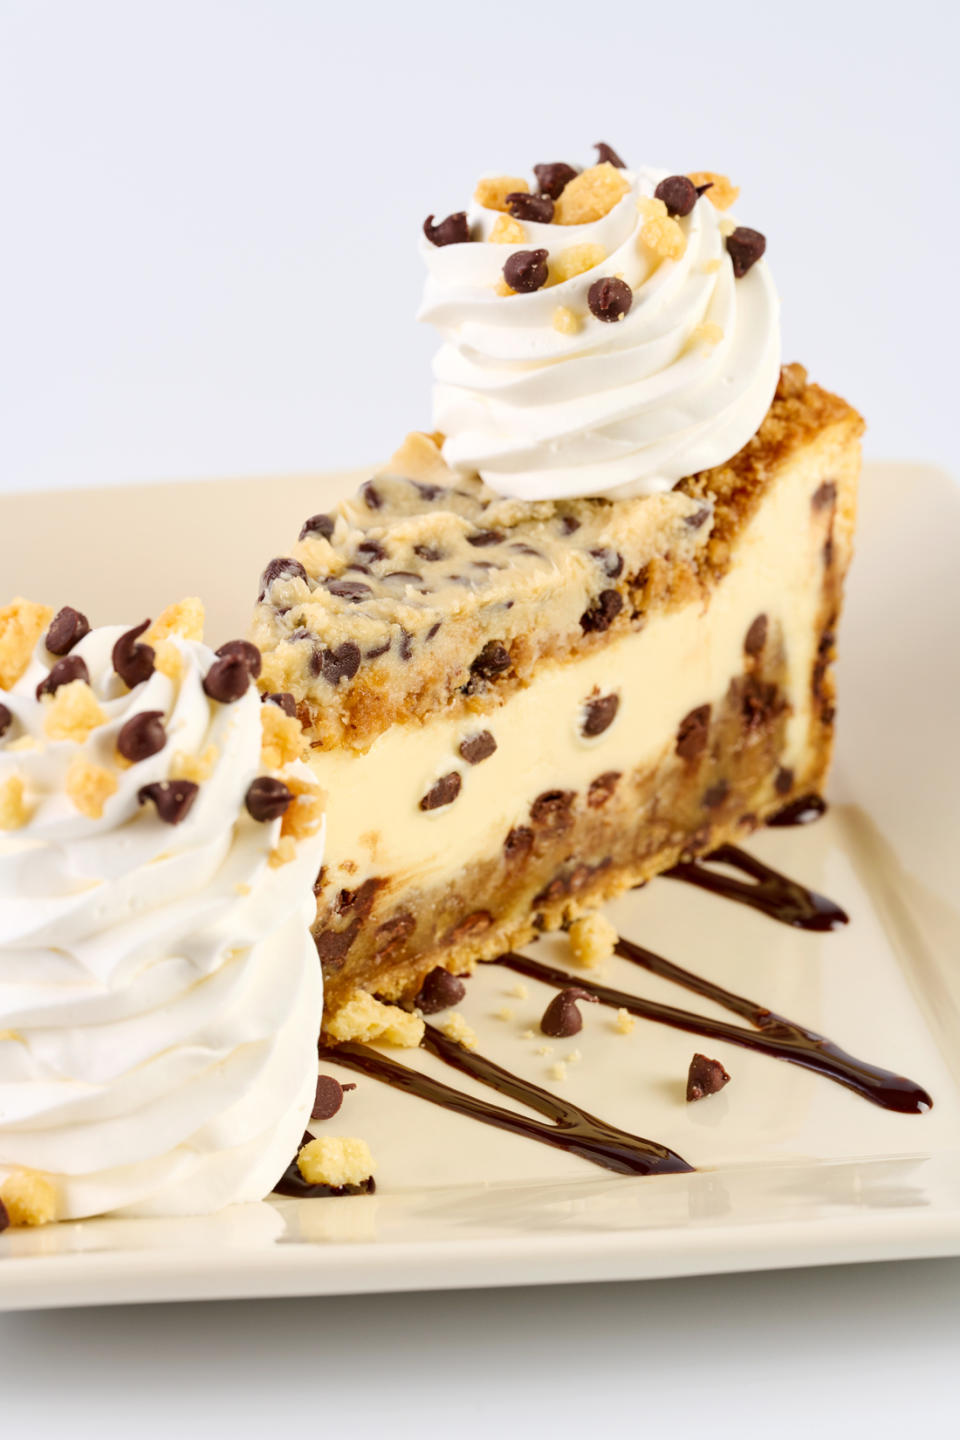 Cheesecake Factory debuts a brand new flavor just in time for National Cheesecake Day (Cheesecake Factory)